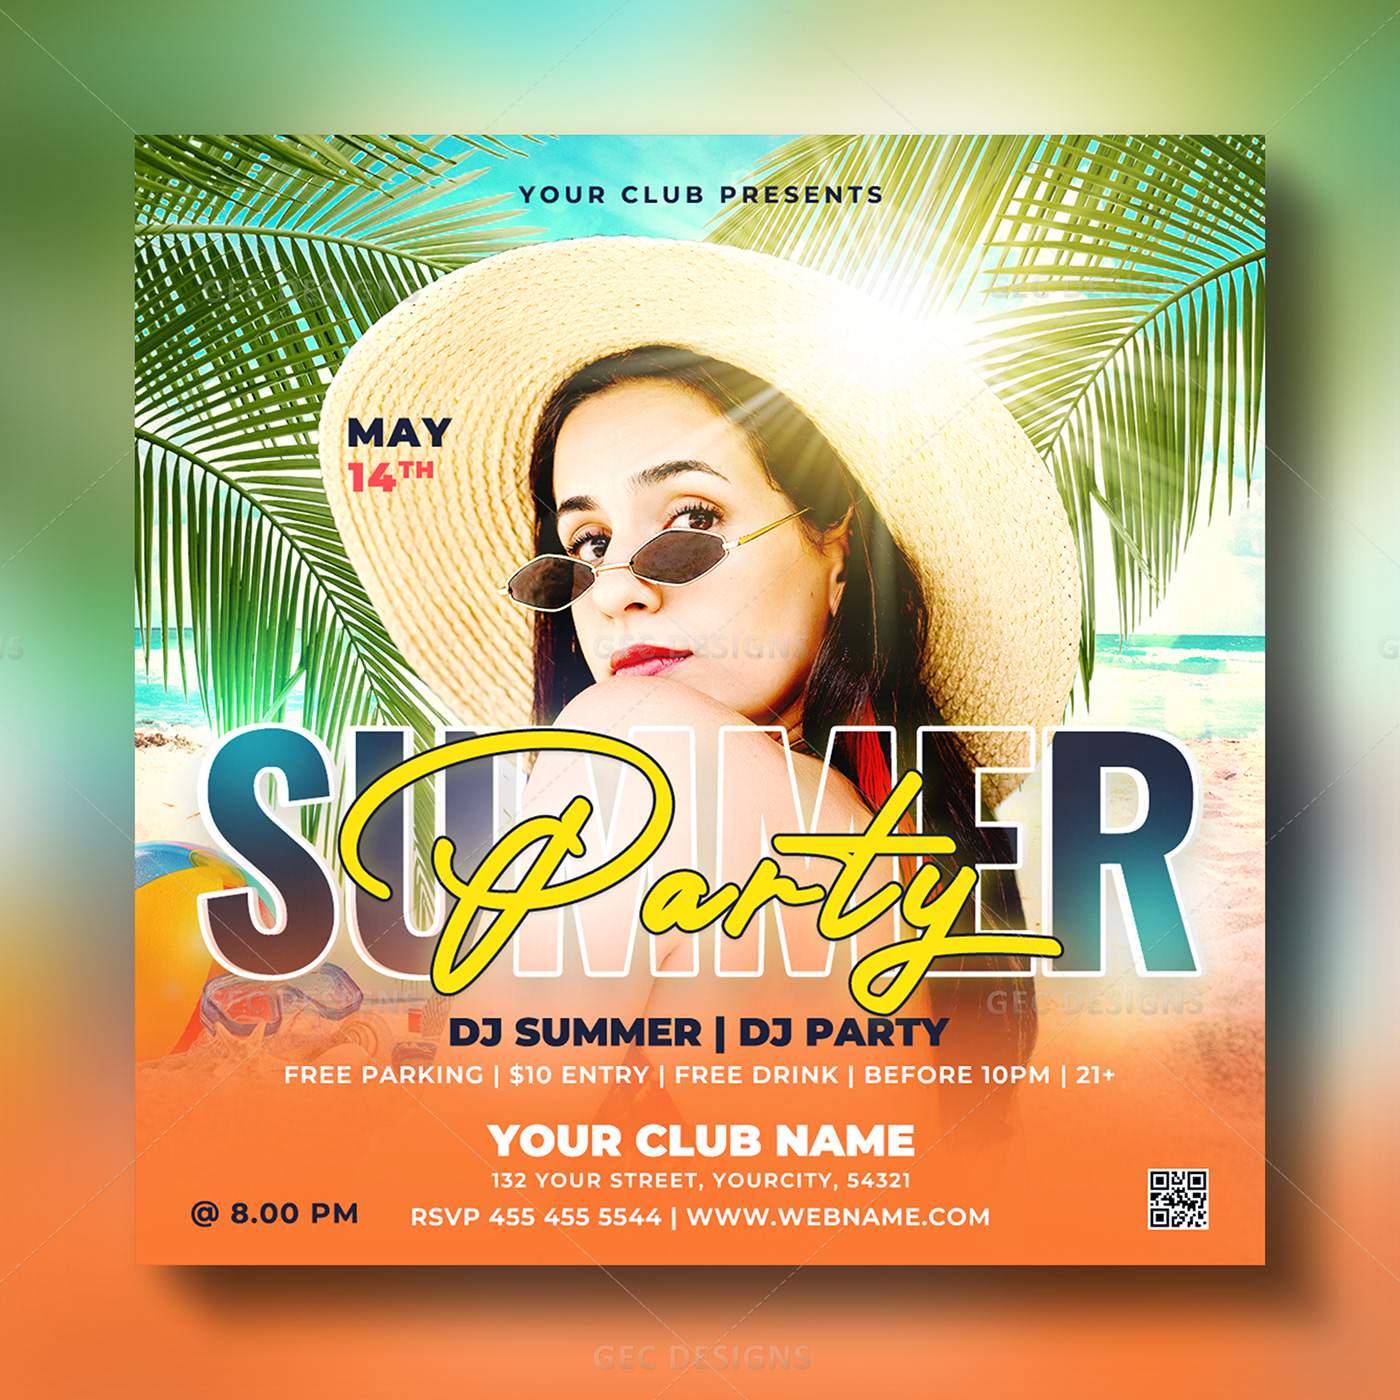 This lively and dynamic Fun in the Sun Summer Party Flyer design.